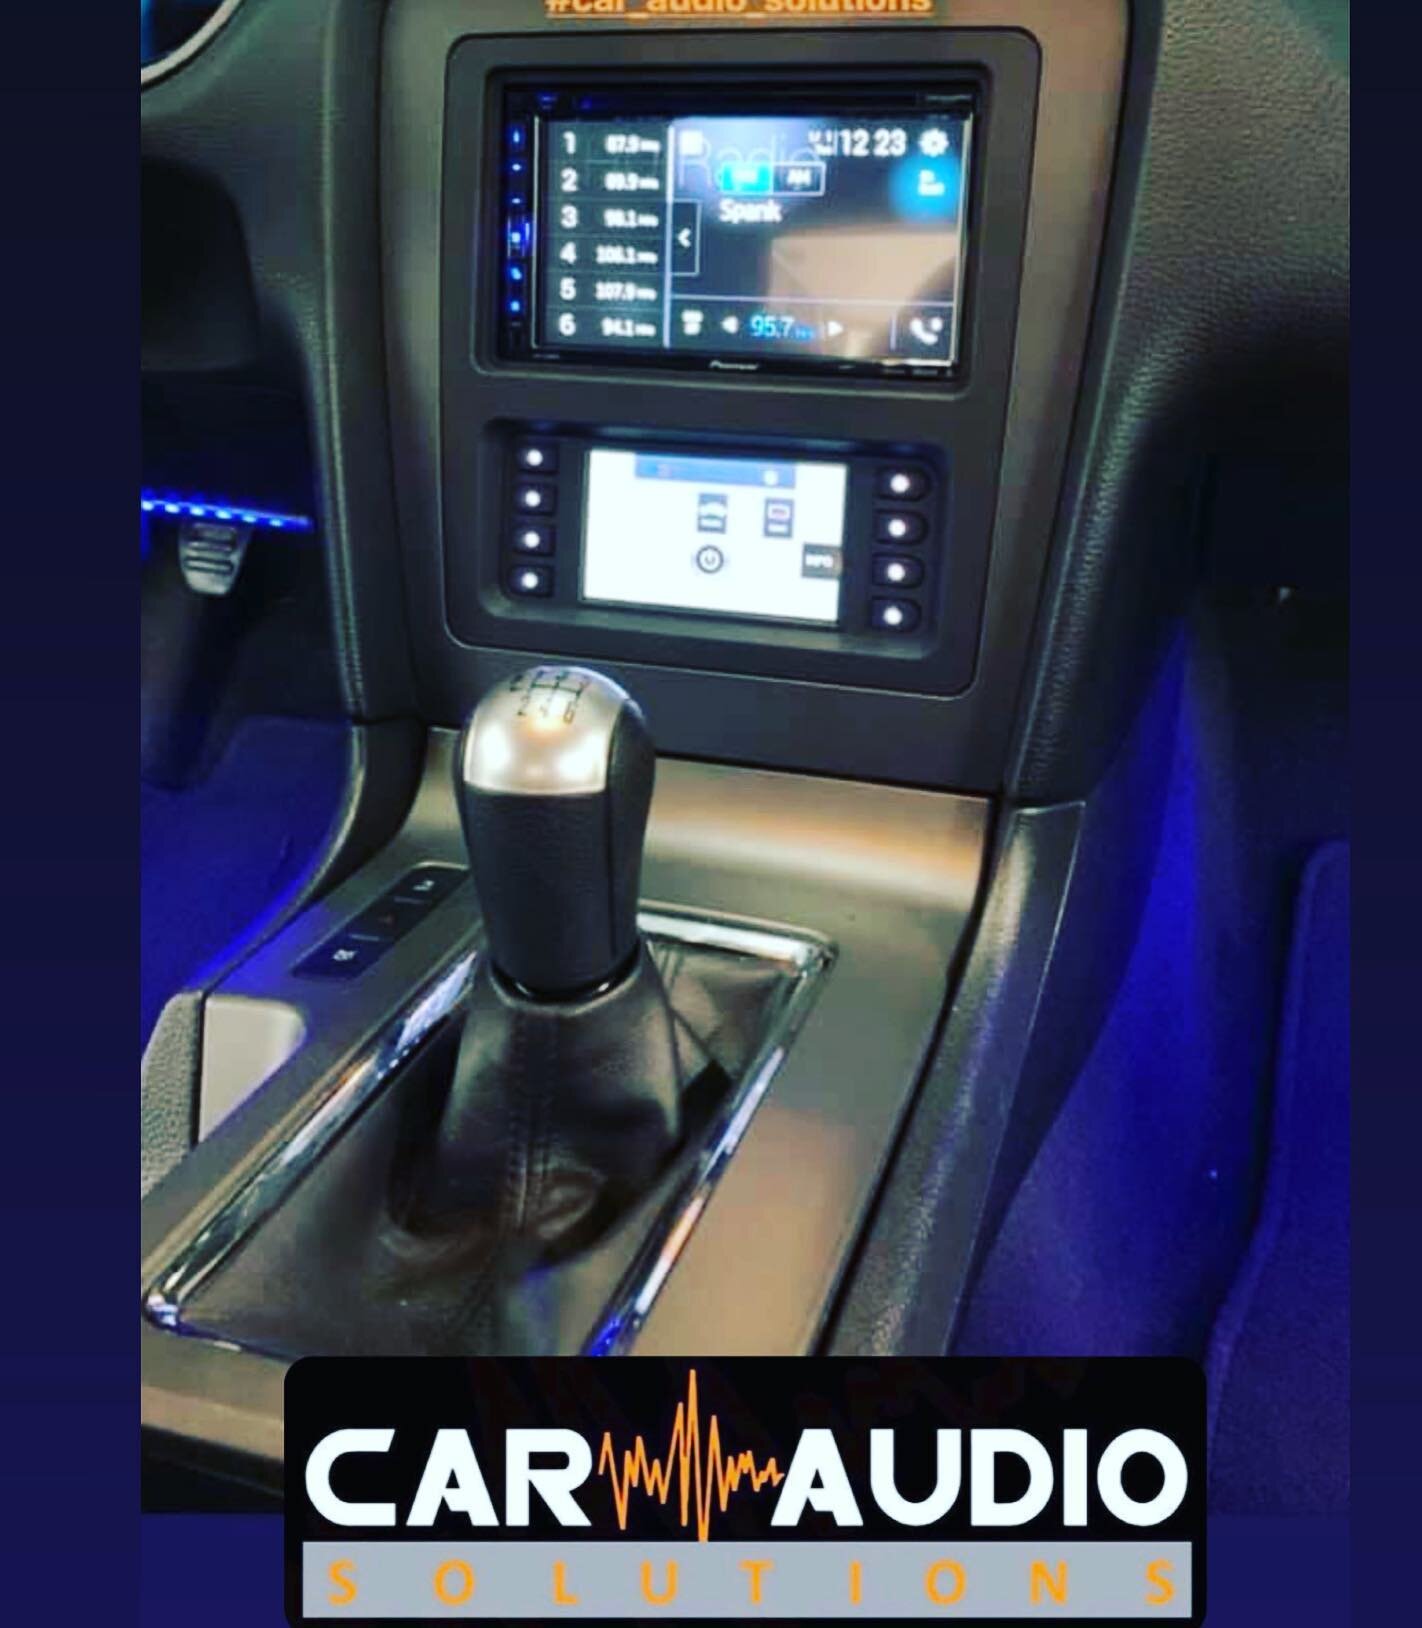 2014 Ford Mustang with a CarPlay upgrade head unit/ Pioneer radio fully loaded lower unit with interior LED lights professionally installed by us #car_audio_solutions !
&bull;
#car_audio_solutions #pioneerradio #pioneercarradio #pioneer #metraelectro